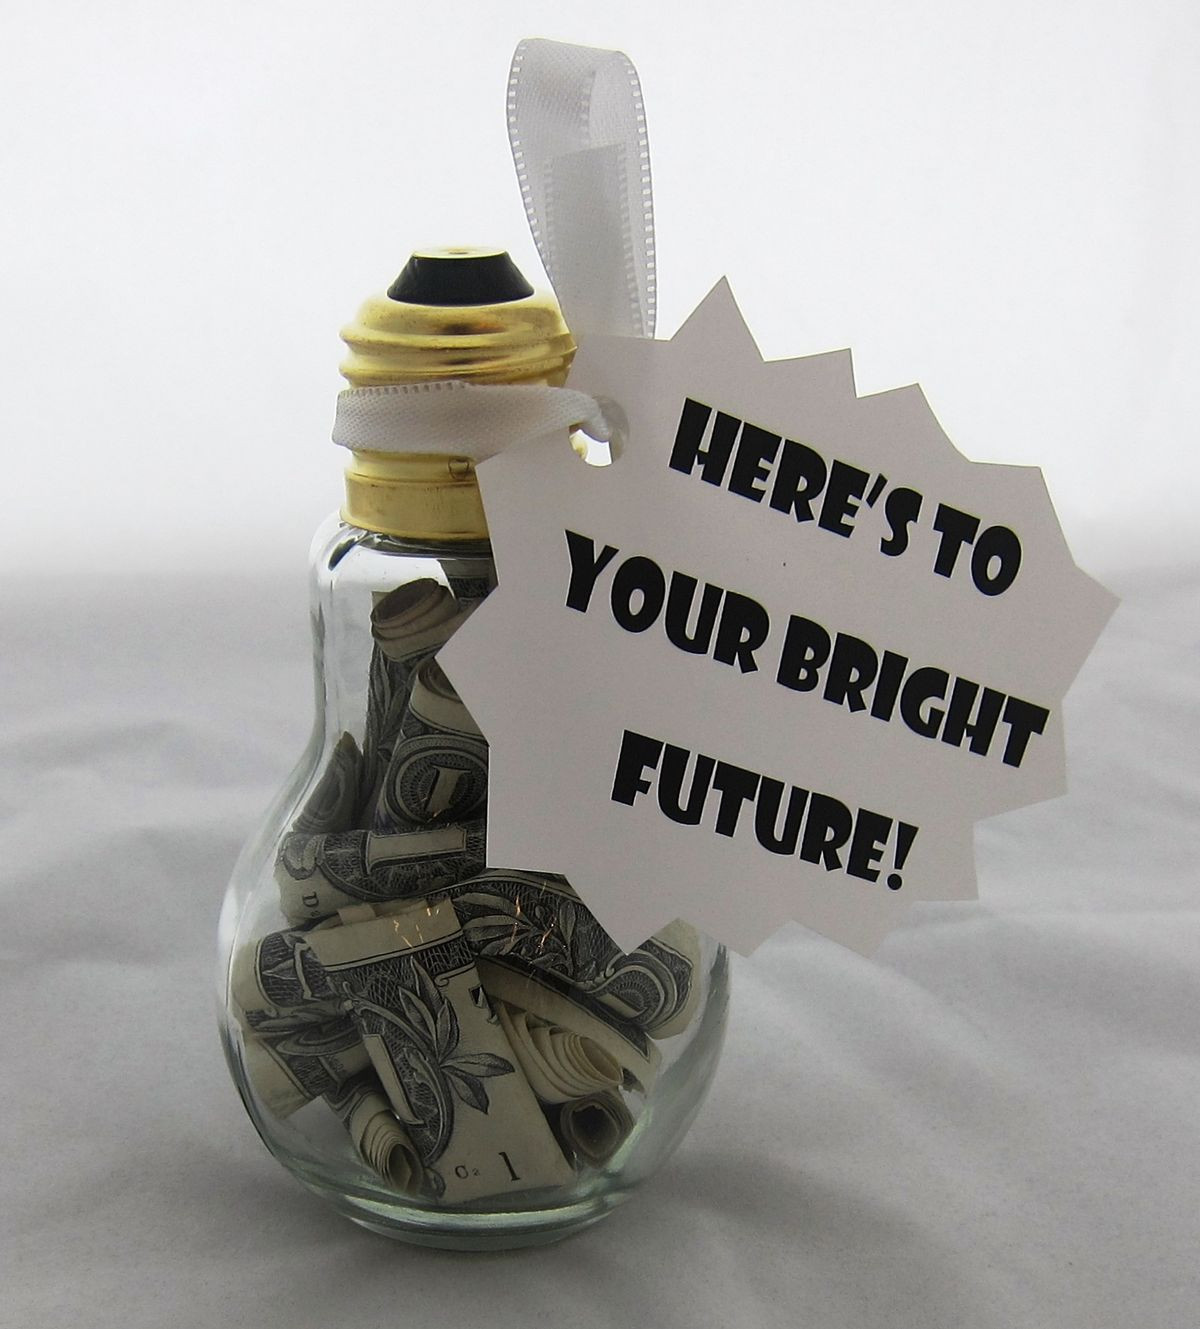 Money Gift Ideas For Graduation
 How Punny Are These 5 Crafty Ways to Give Cash Gifts